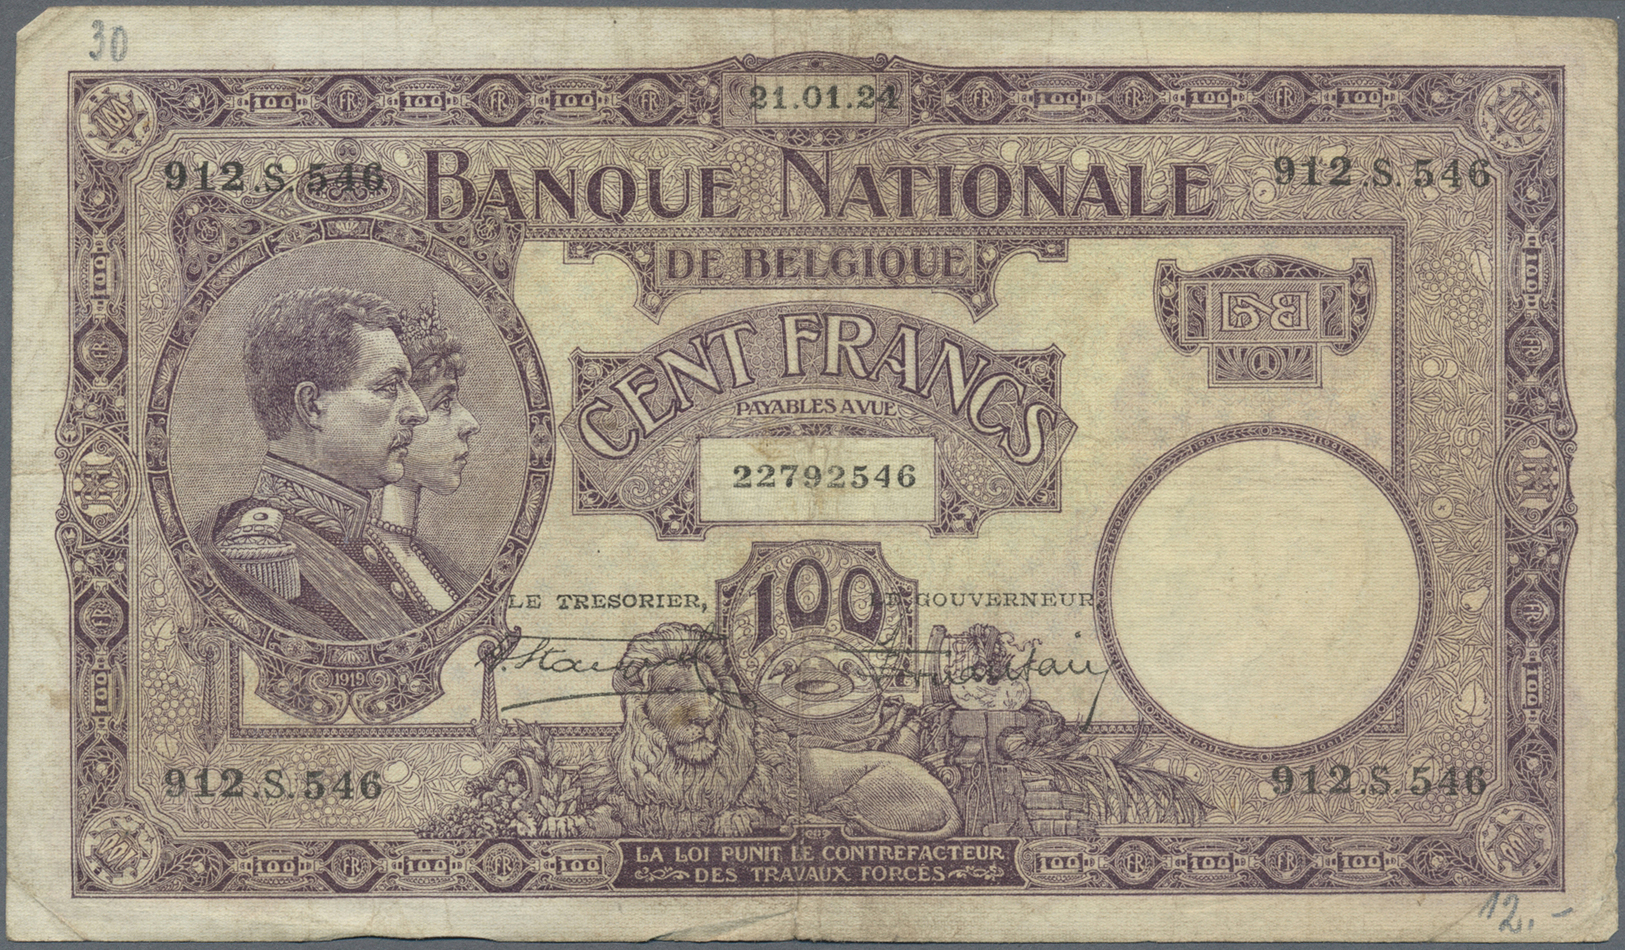 00280 Belgium / Belgien: set with 4 Banknotes 100 Francs 1924 and 1927, P.95 in almost well worn condition with stained